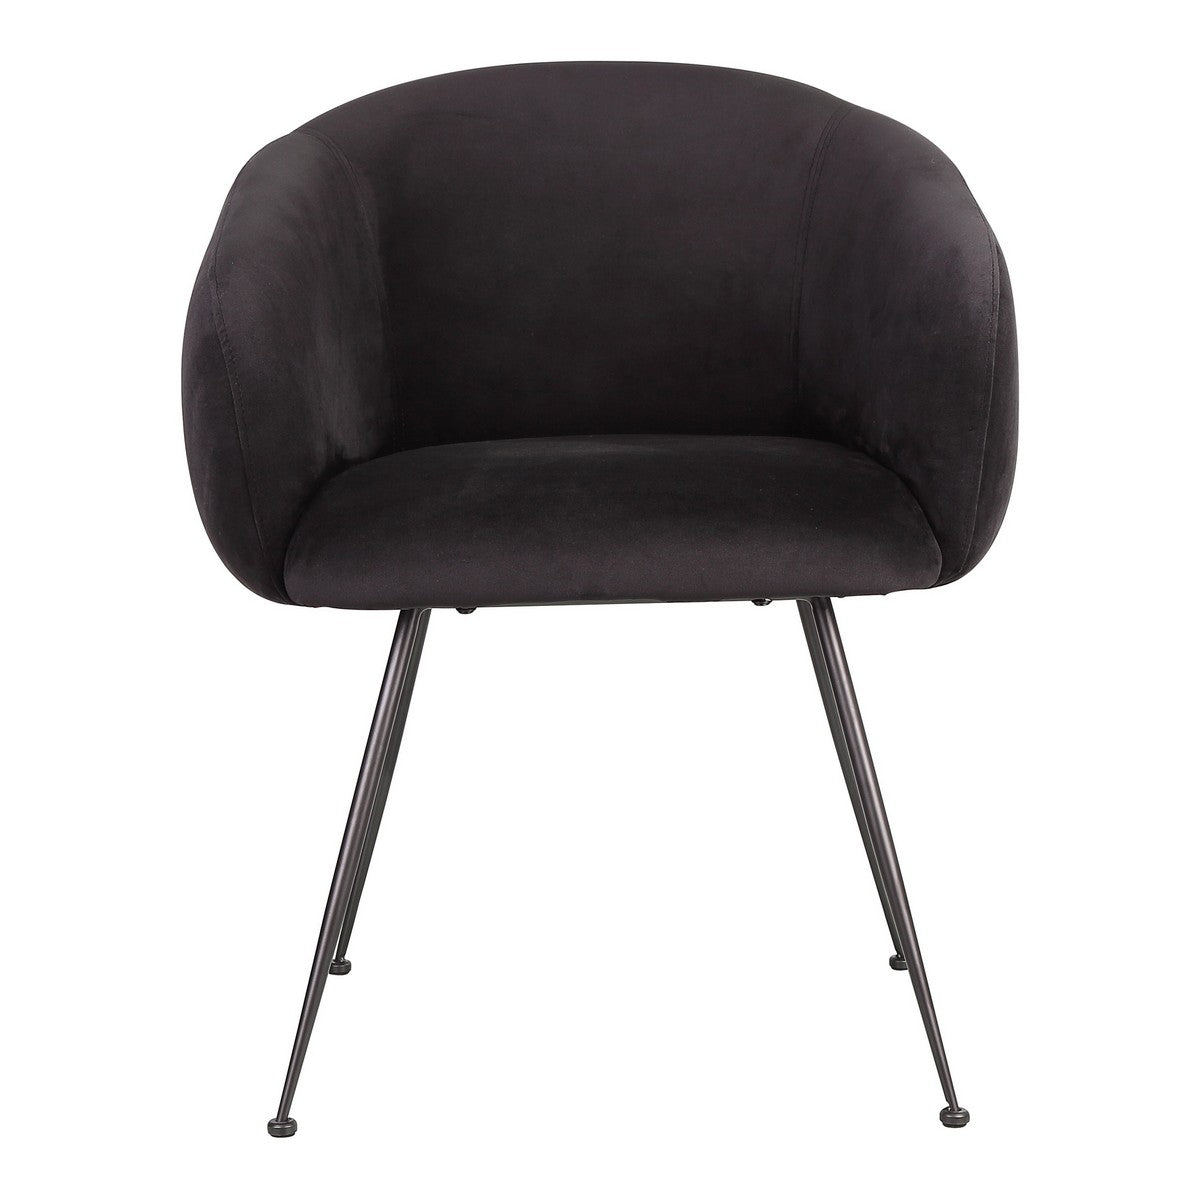 Moe's Home Collection Clover Dining Chair Black - EH-1108-02 - Moe's Home Collection - Dining Chairs - Minimal And Modern - 1